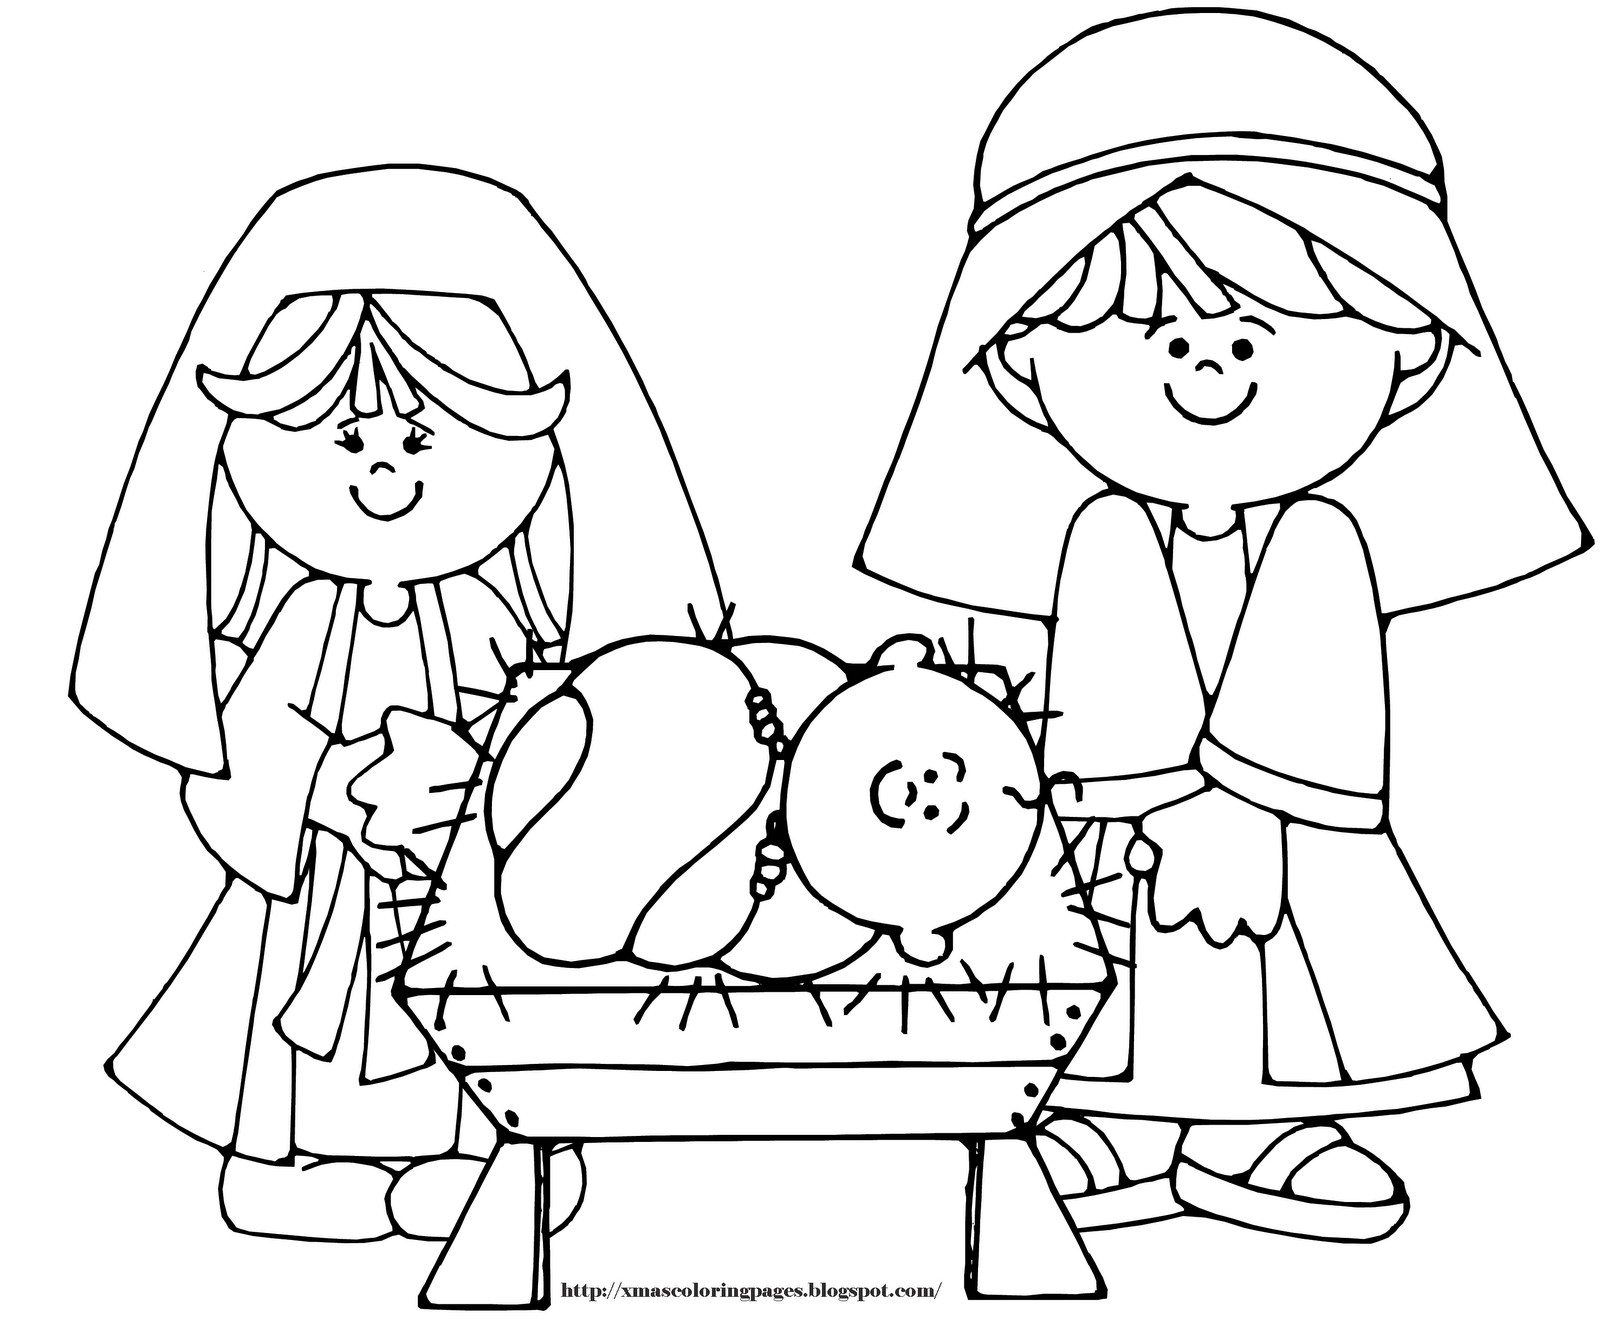 343 Animal Coloring Pages Of Mary Joseph And Baby Jesus with Animal character